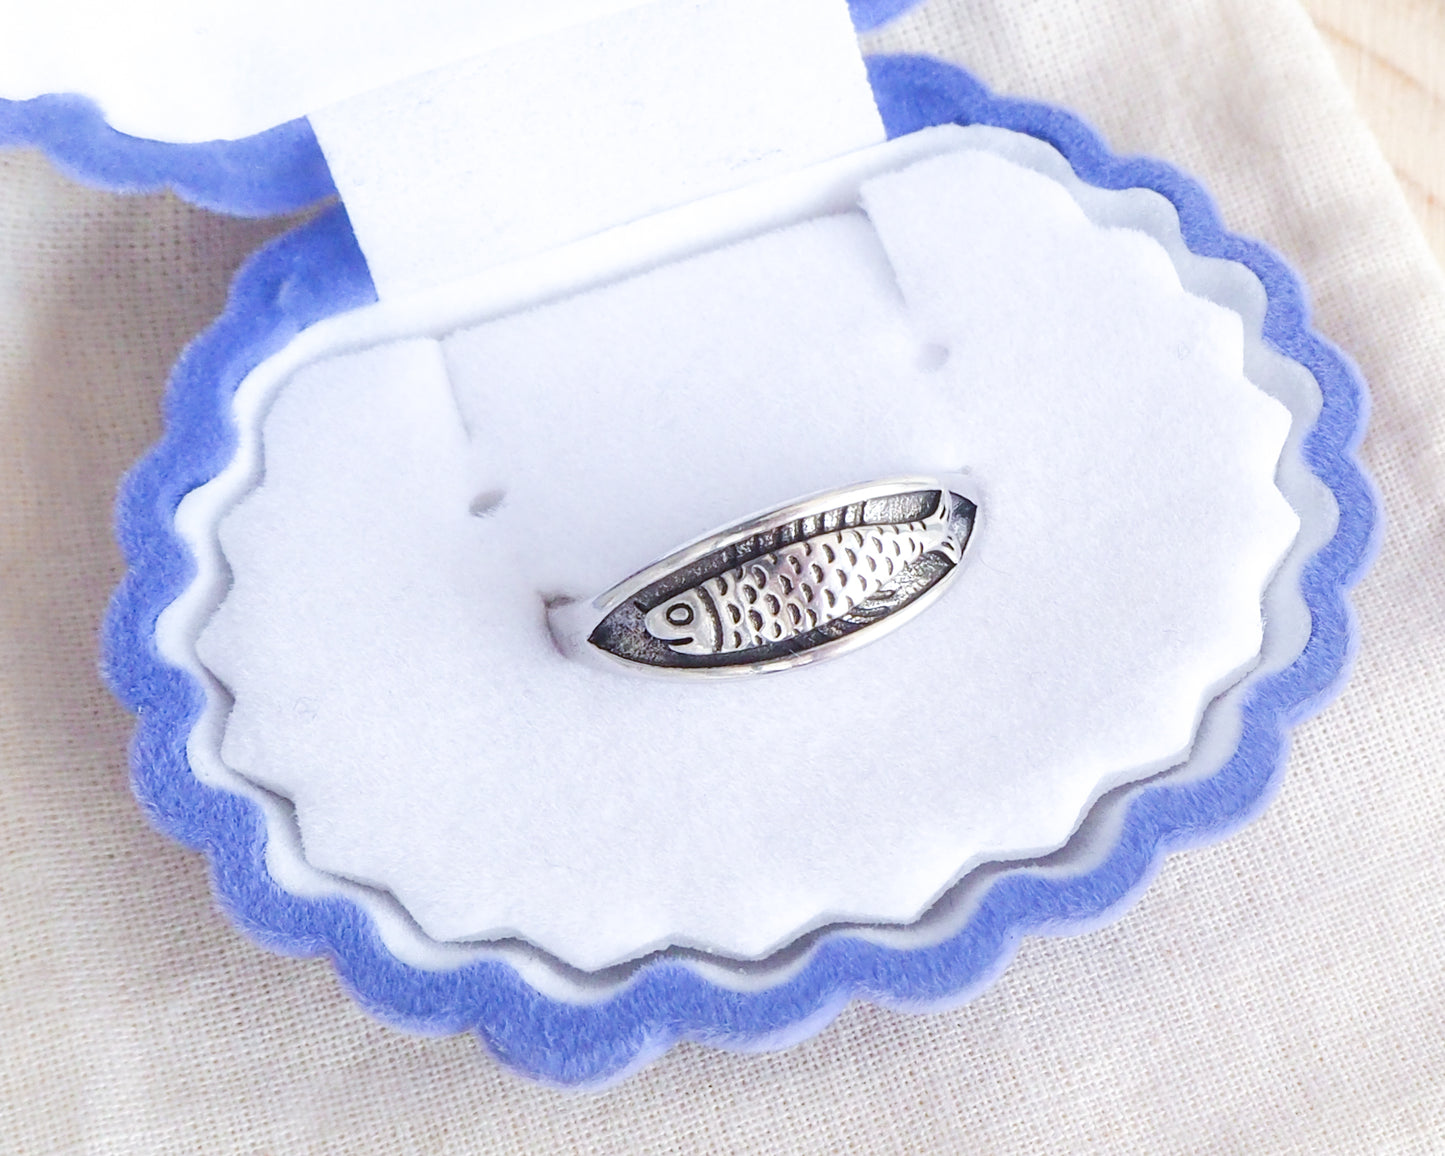 Sardine Fish Ring made with 925 Sterling silver in jewelry box, Sardine jewelry from Portugal, Coastal style, Minimalistic jewelry